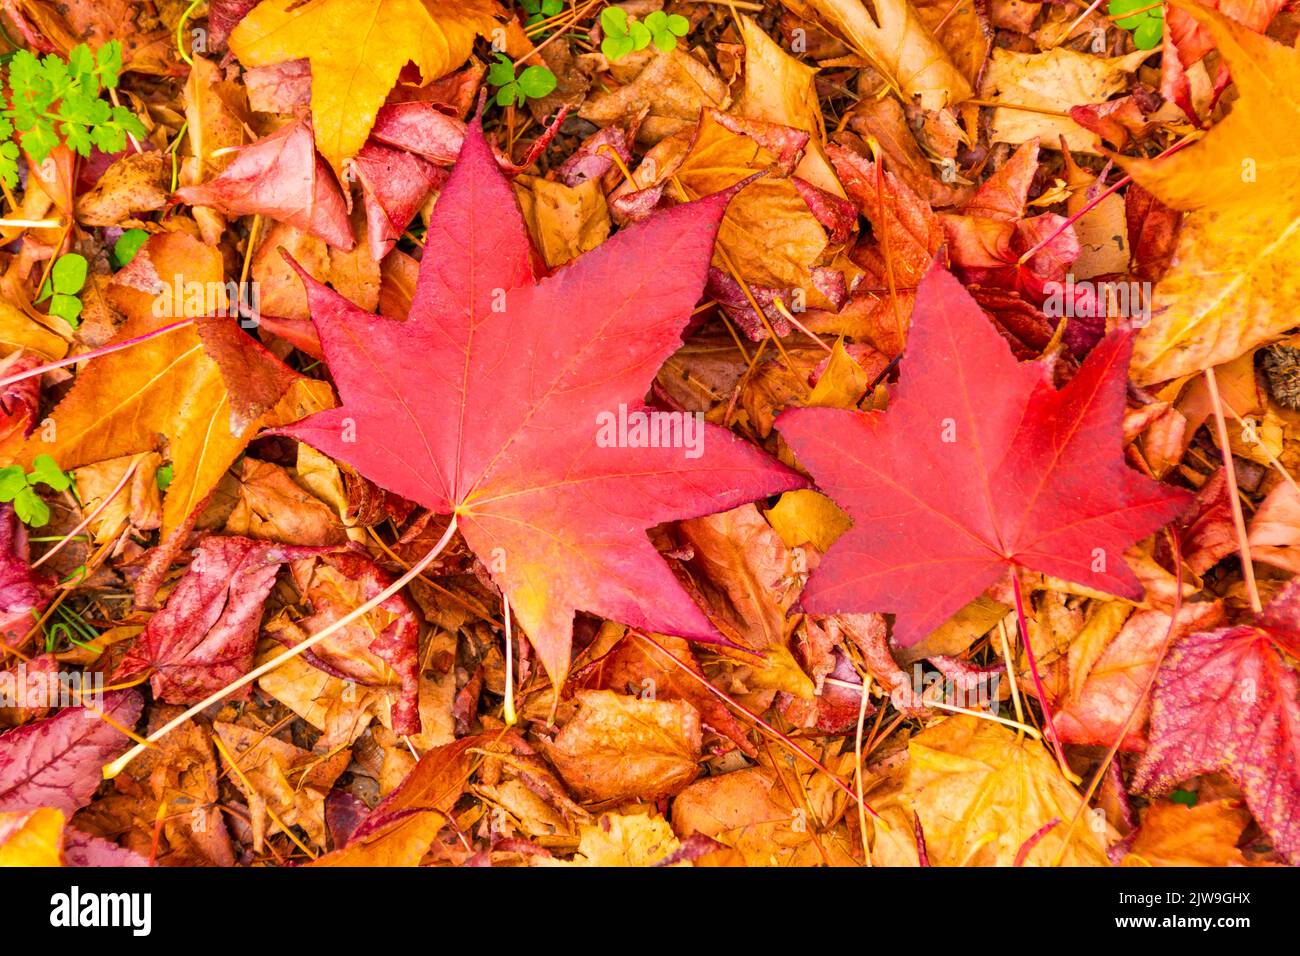 Autumn, colorful leaves of liquidambar lie on the grass and dry leaves of trees. Stock Photo